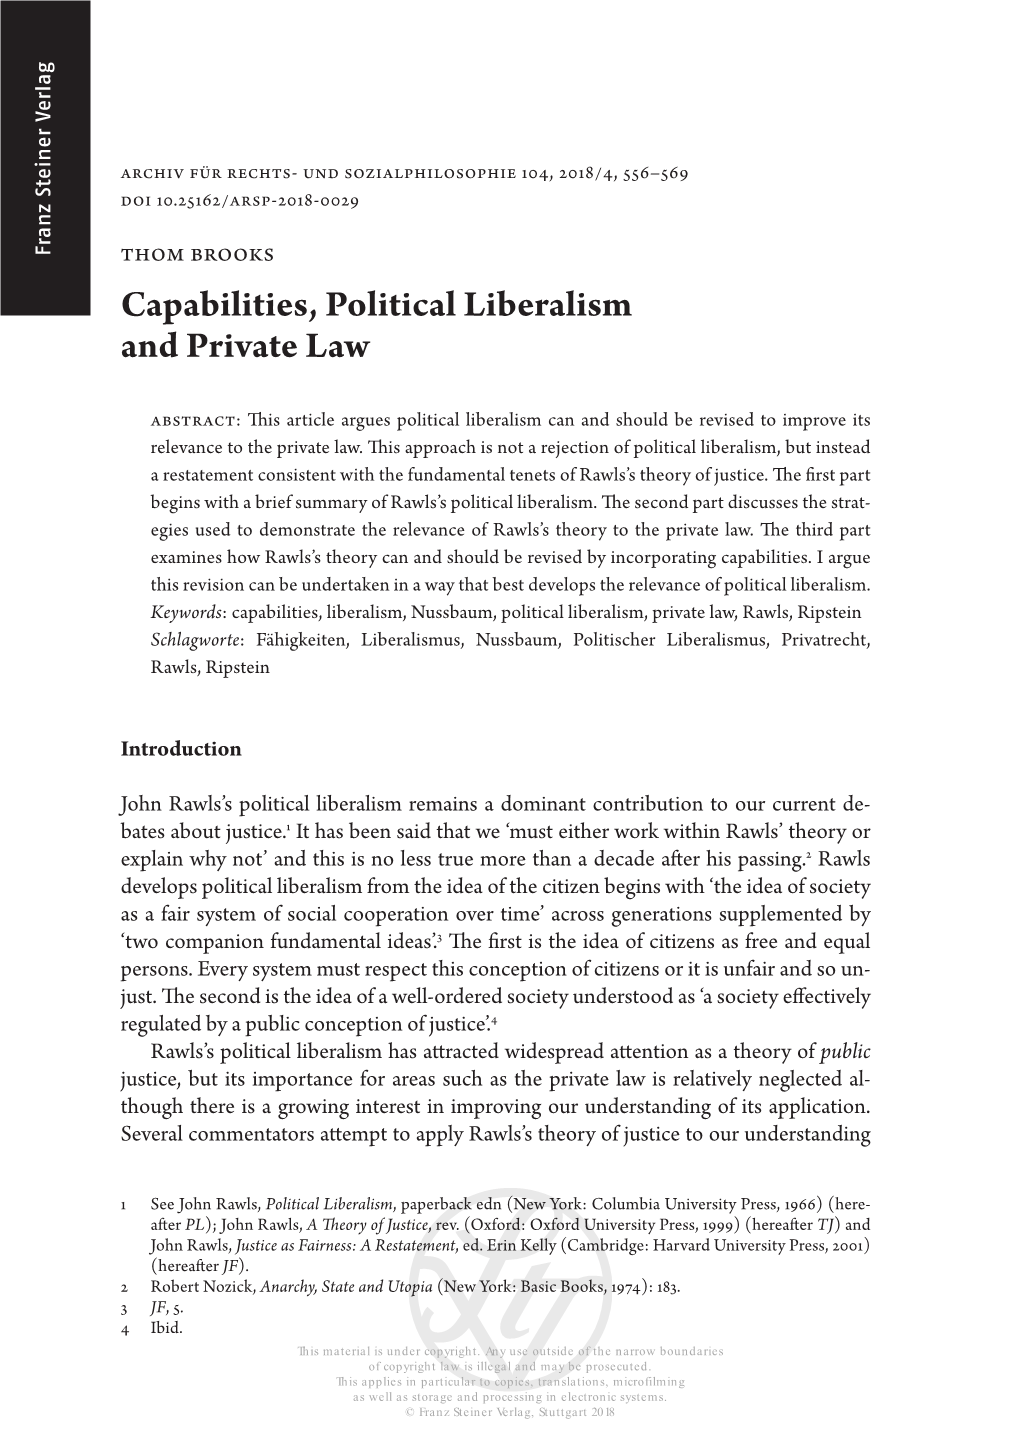 Capabilities, Political Liberalism and Private Law